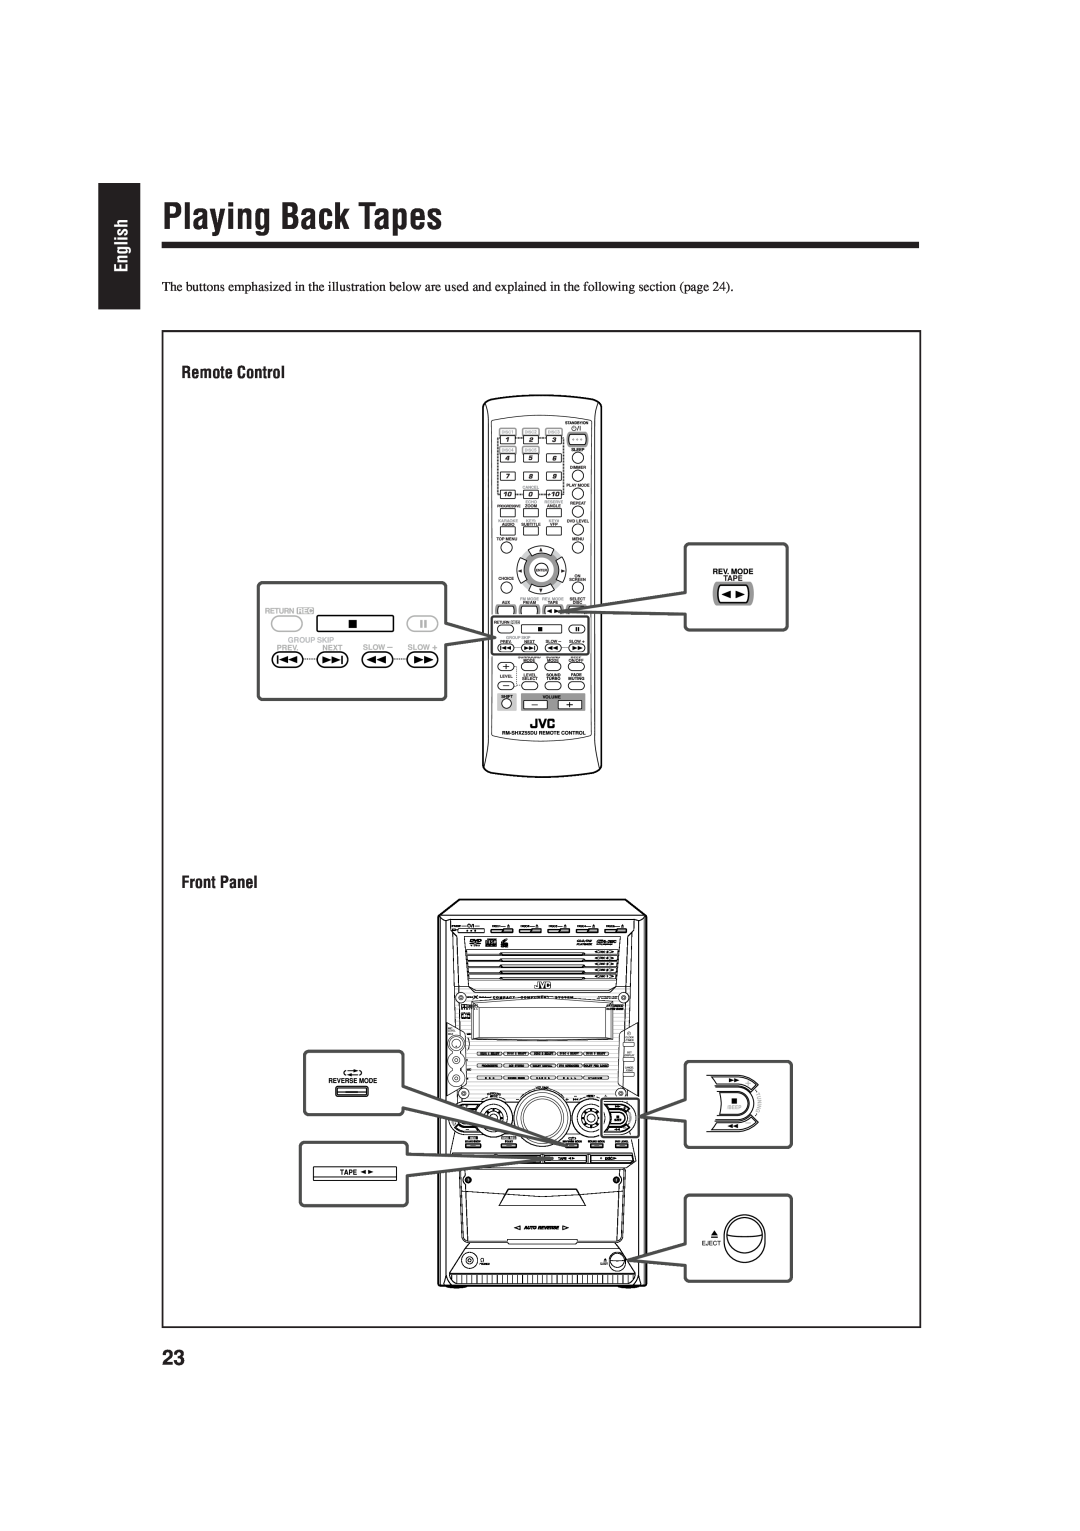 JVC CA-HXZ77D, GVT0119-001C, CA-HXZ55D manual Playing Back Tapes, English, Front Panel, Remote Control 